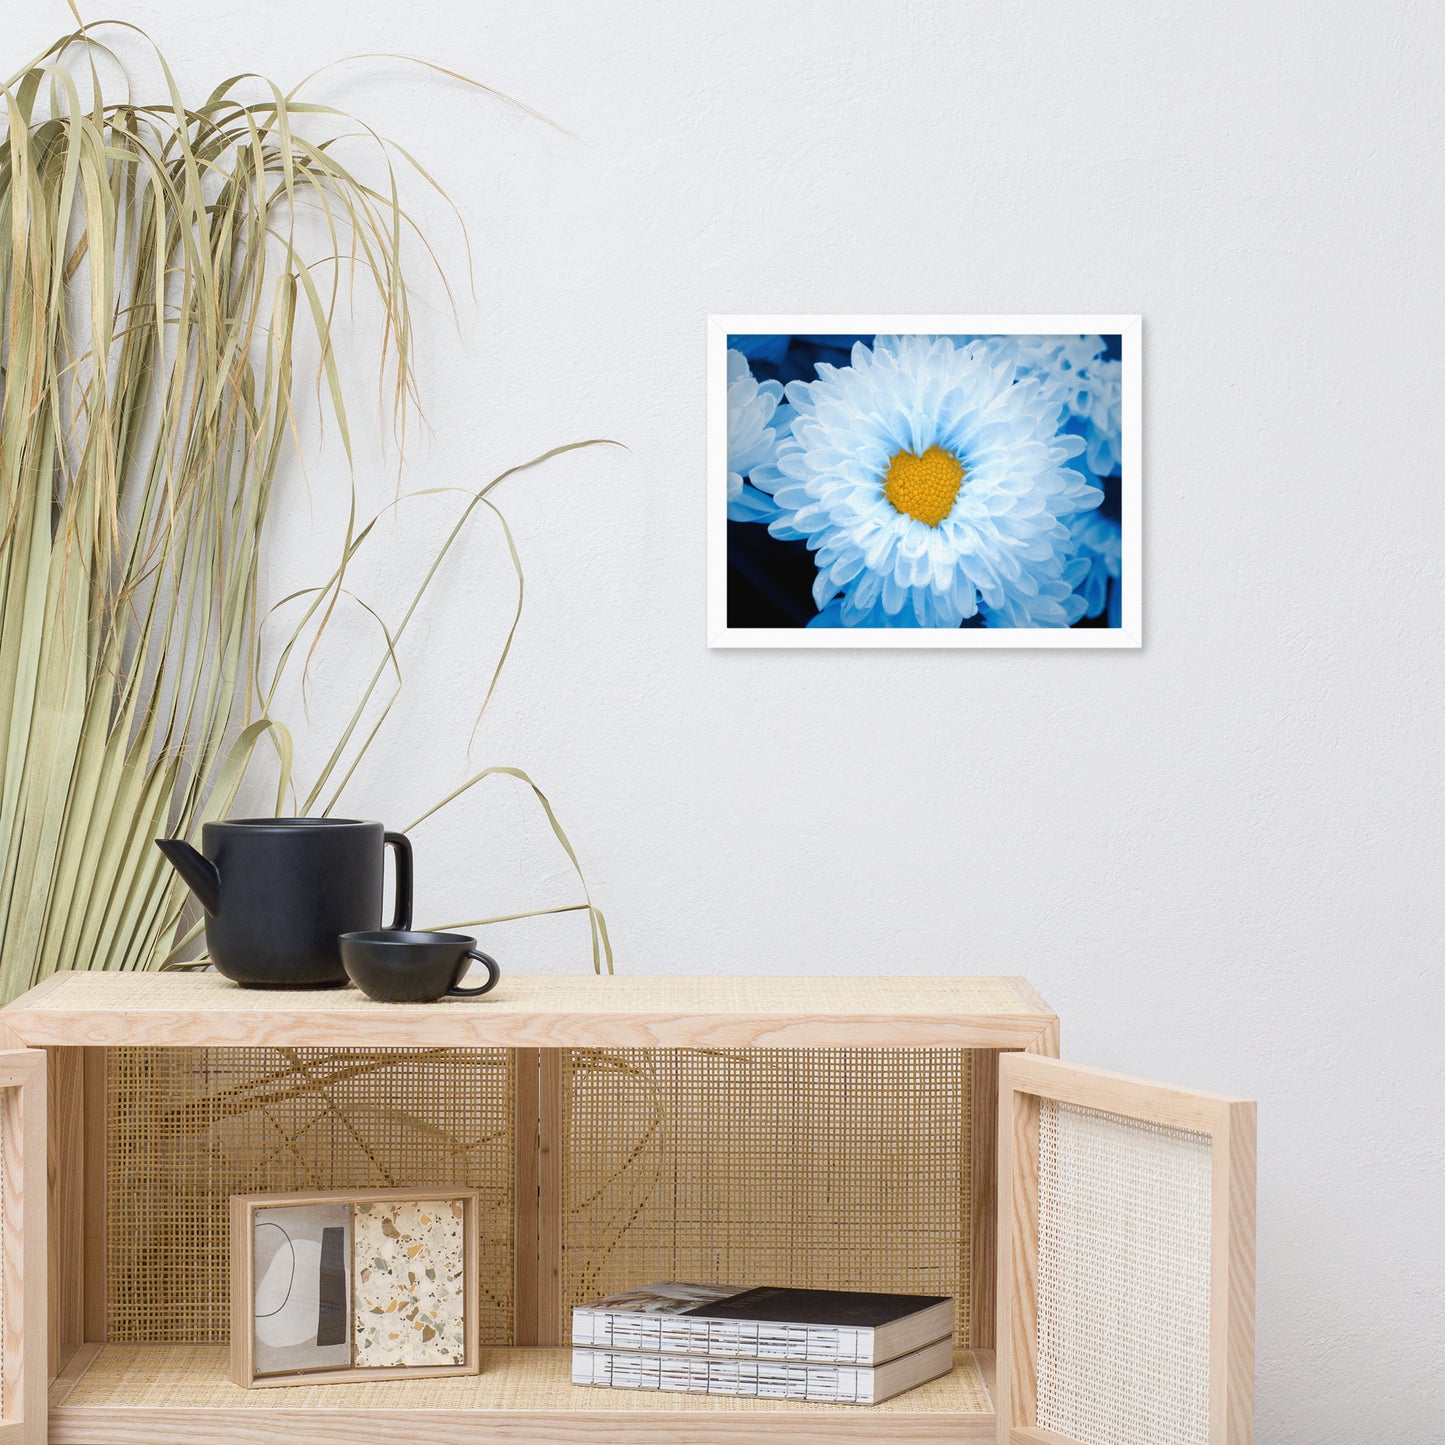 Blue Tinted Chrysanthemums For Ukraine Refugees Floral Nature Photo Framed Wall Art Print